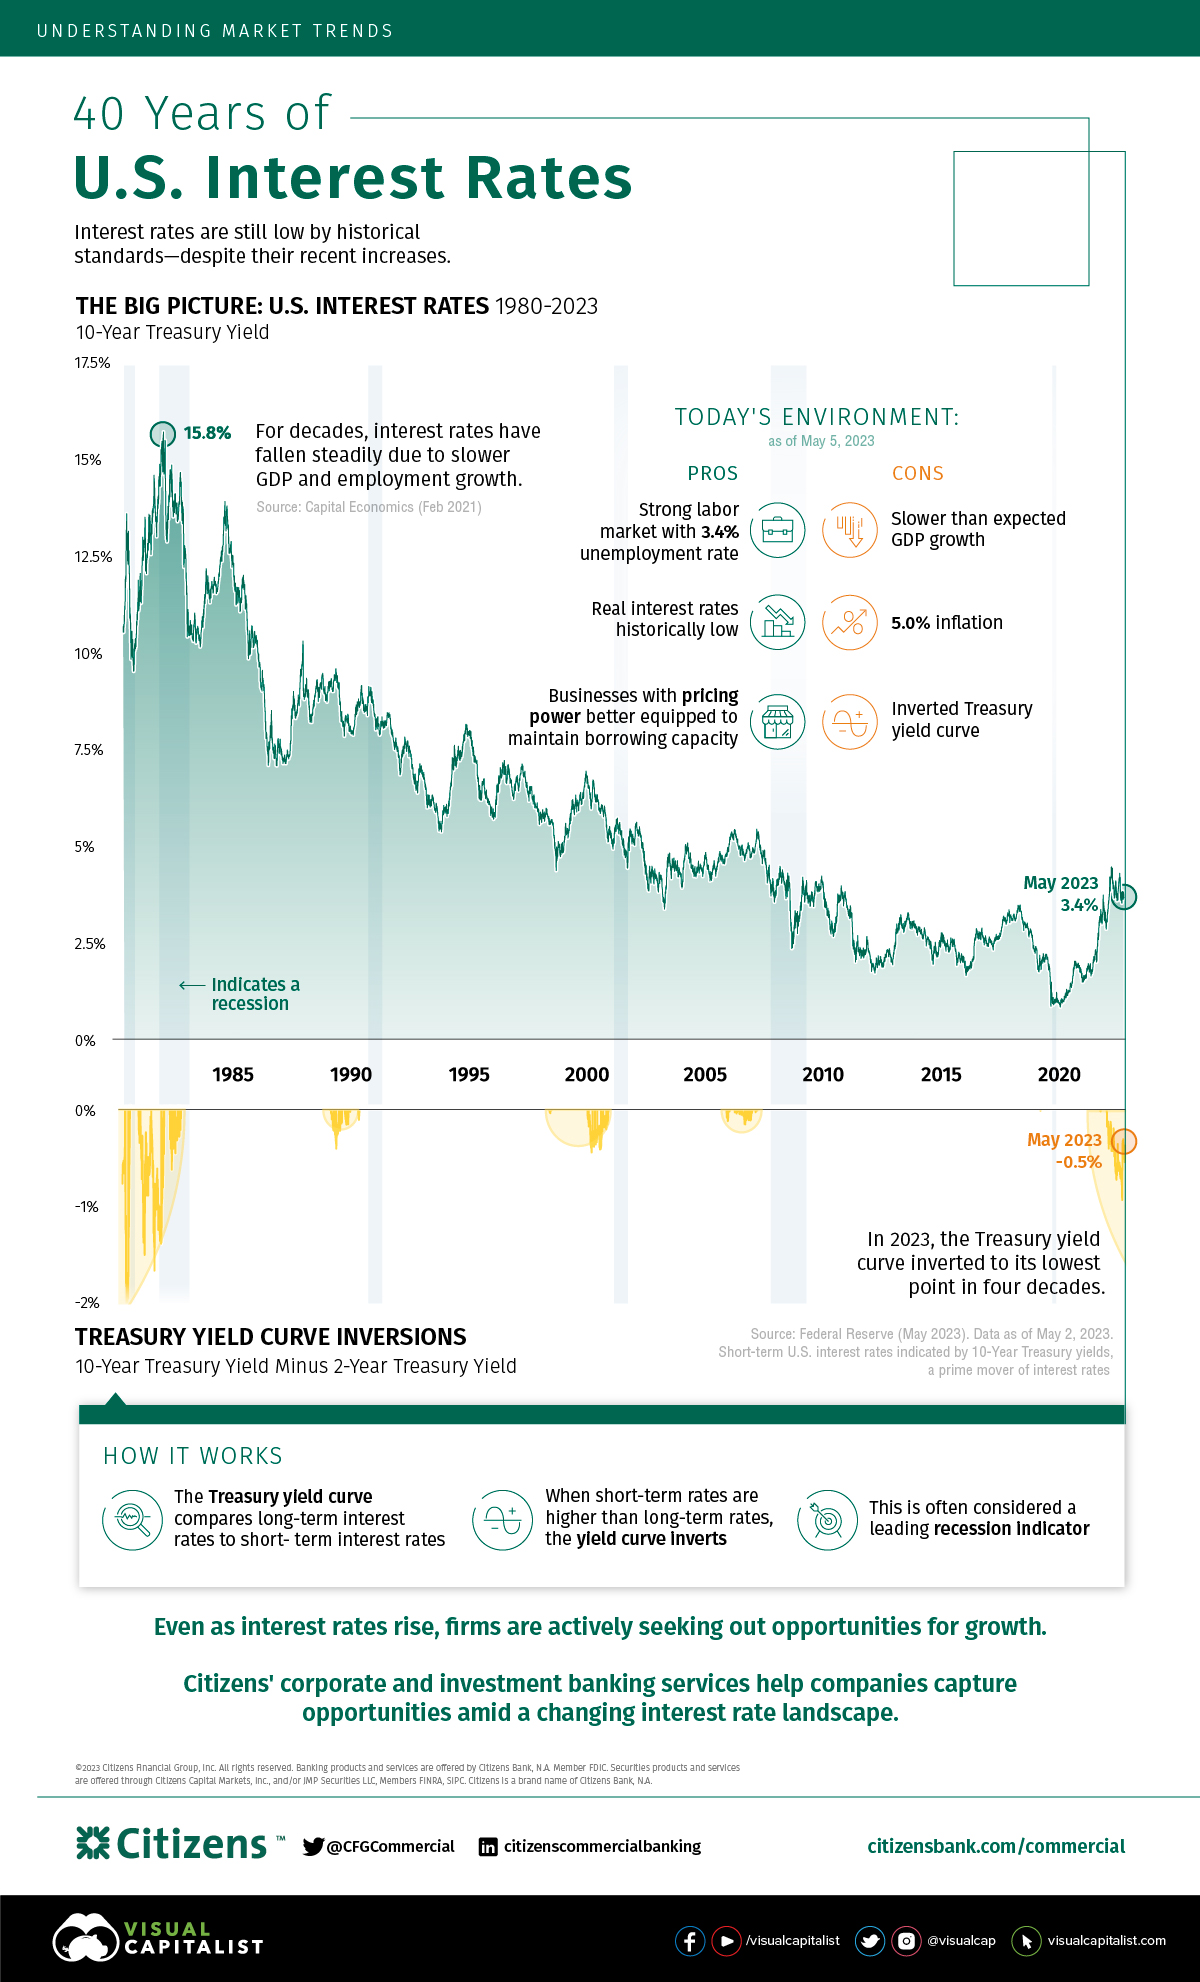 Citizens Bank Seizing Capital Opportunities Impact Graphic May 5 